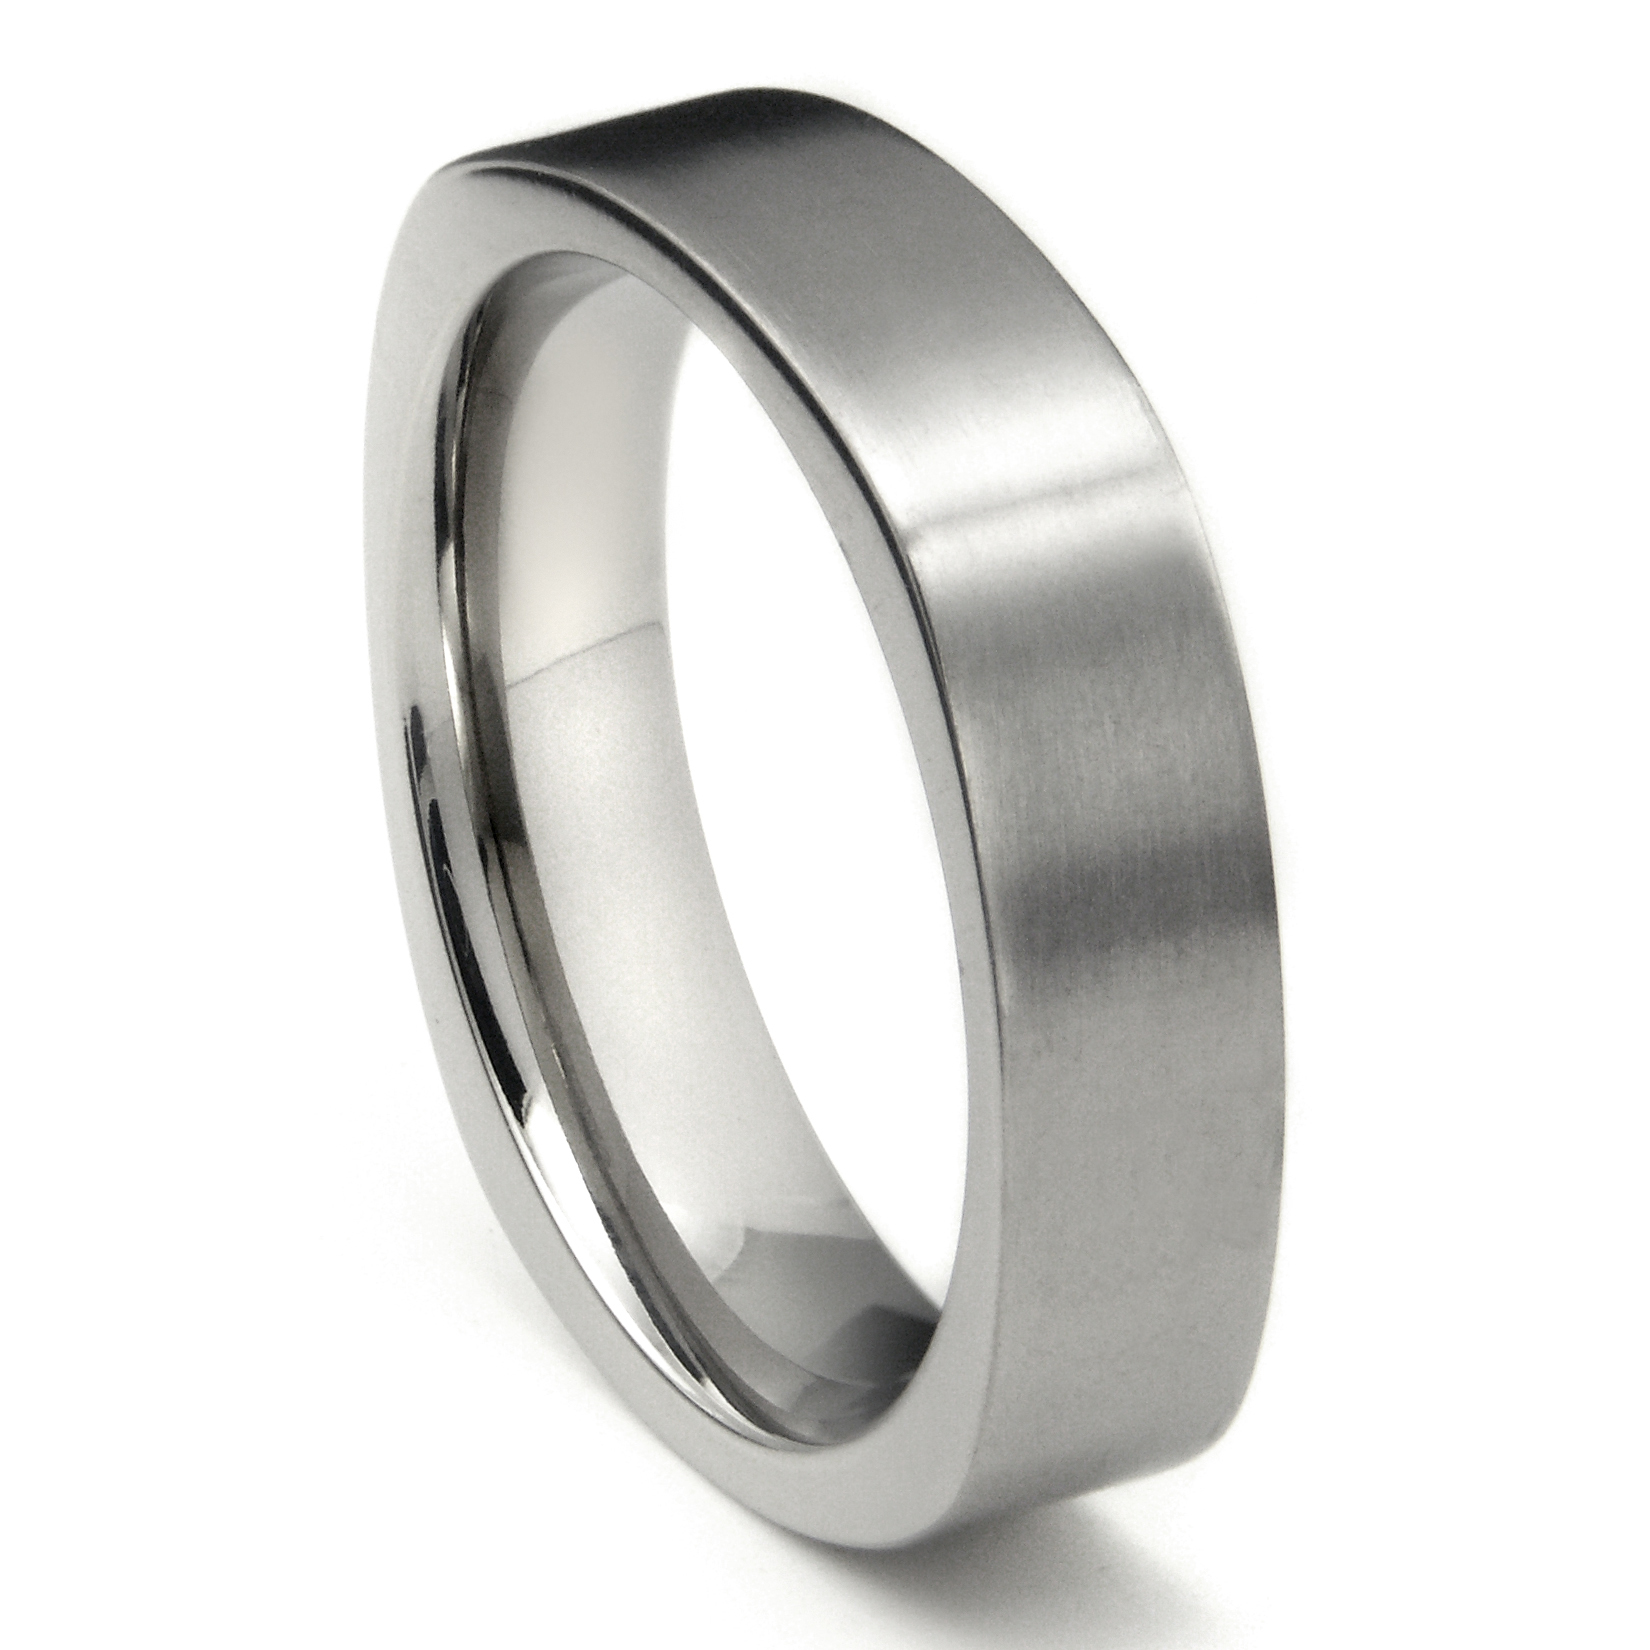 Best Collections Of Satin Finish Wedding Bands